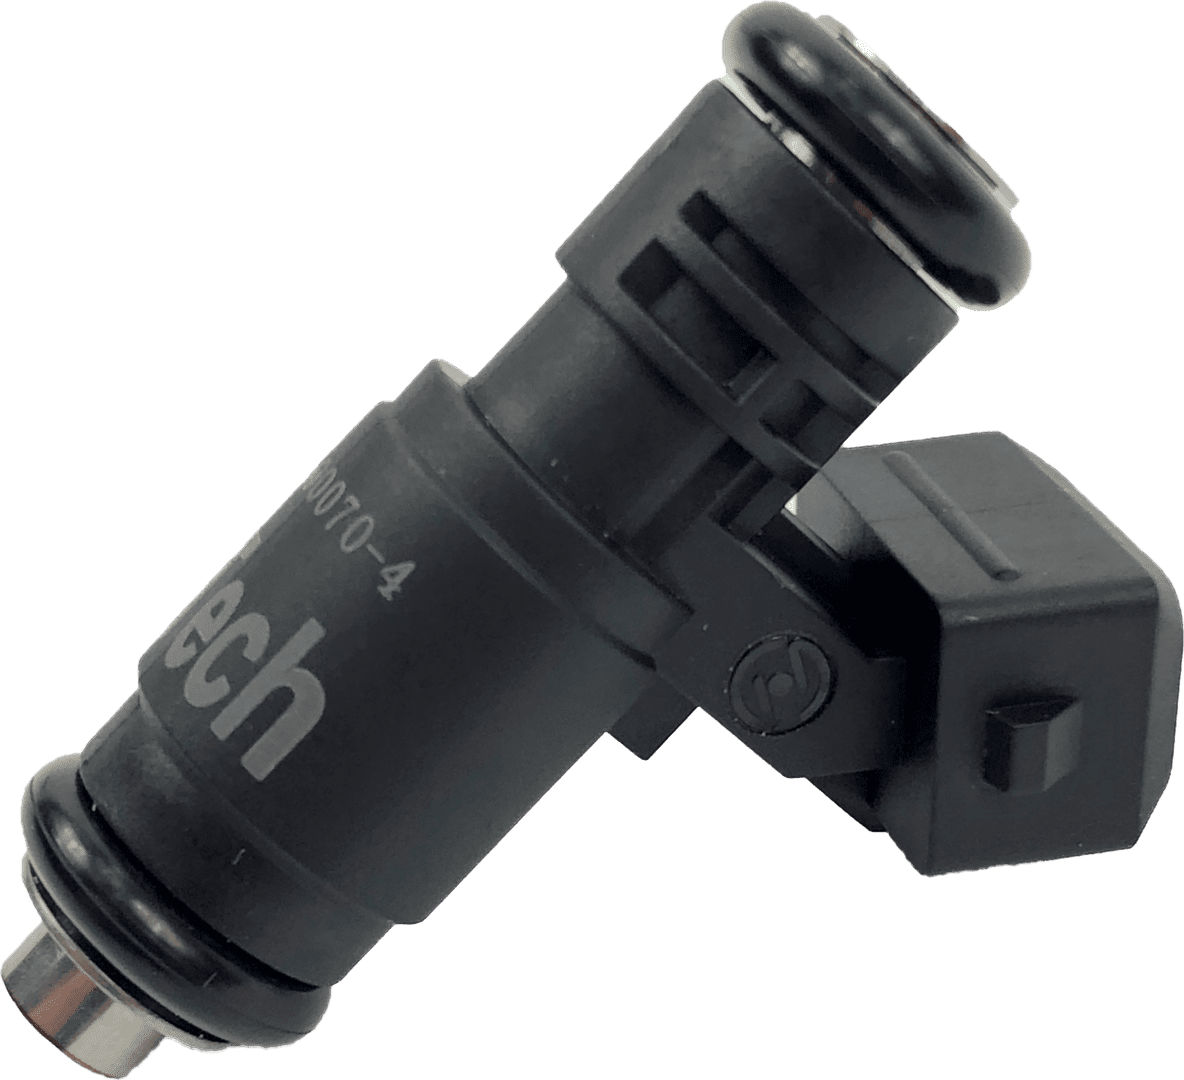 FiTech 10080 Go Fuel Series Replacement Electronic Fuel Injector (80-lb, individual)